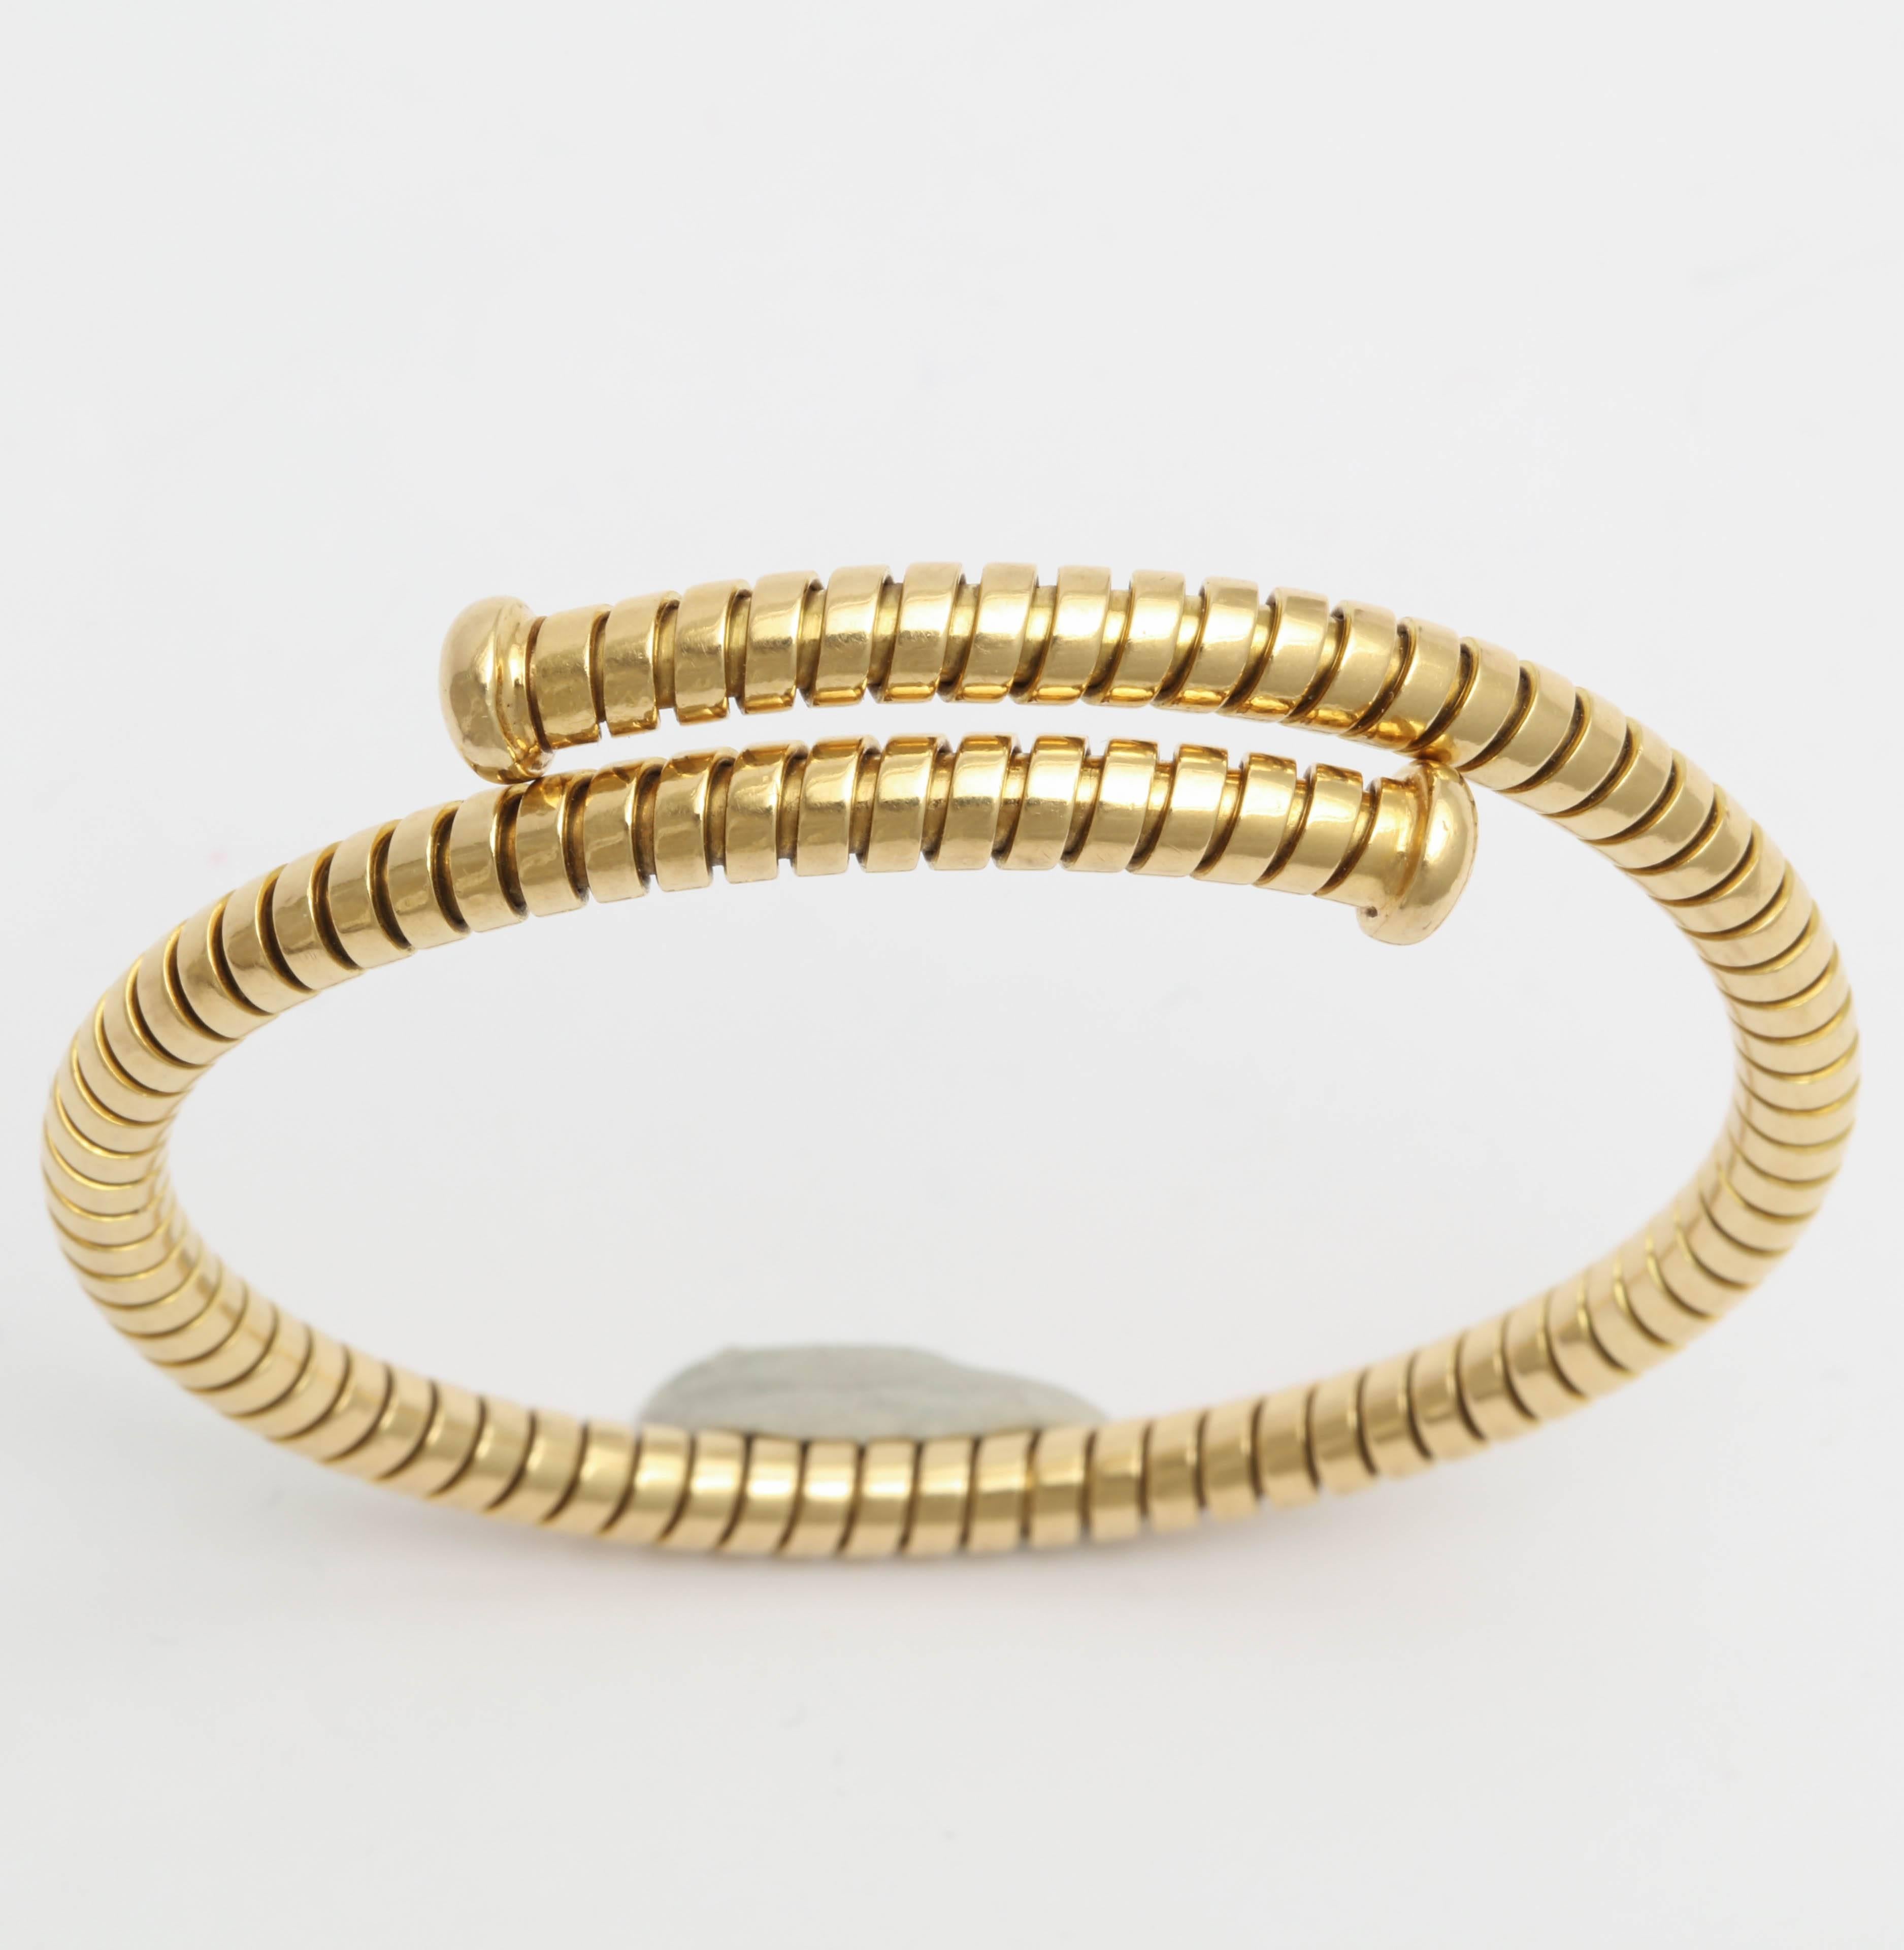 Super chic 18y Yellow Gold Cuff Bangle with nail headed terminals.  Interior Measurements 1.
1.90 wide x 2,15 but expandable. . Signed Bulgari and 750 and bearing an Italian control mark.